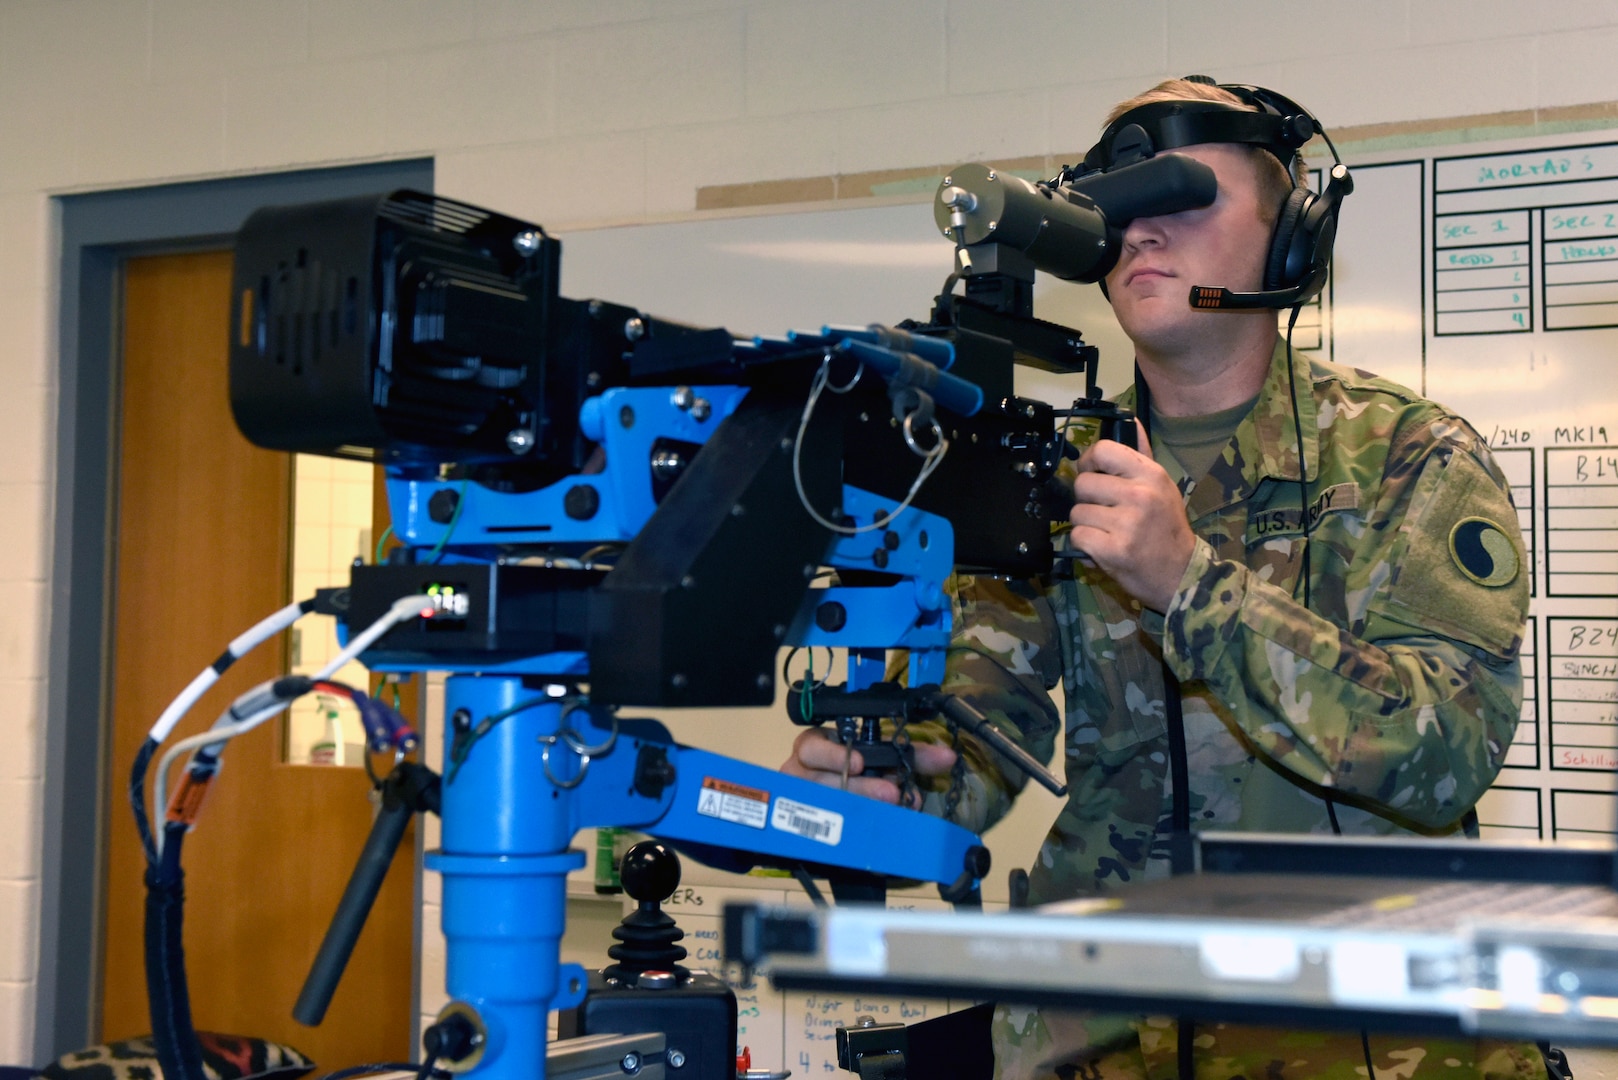 Spc. Erik Murphy, a cavalry scout with the Virginia Army National Guard's Troop B, 2nd Squadron, 183rd Cavalry Regiment, engages targets with an M2 .50 caliber machine gun on the Individual Unstabalized Gunnery Trainer during training at the Suffolk Armory in Suffolk, Virginia, June 8, 2019. The IUGT is a computer-based simulator that connects the body of a weapon to a virtual reality system and is used to augment the training on crew-served weapons.